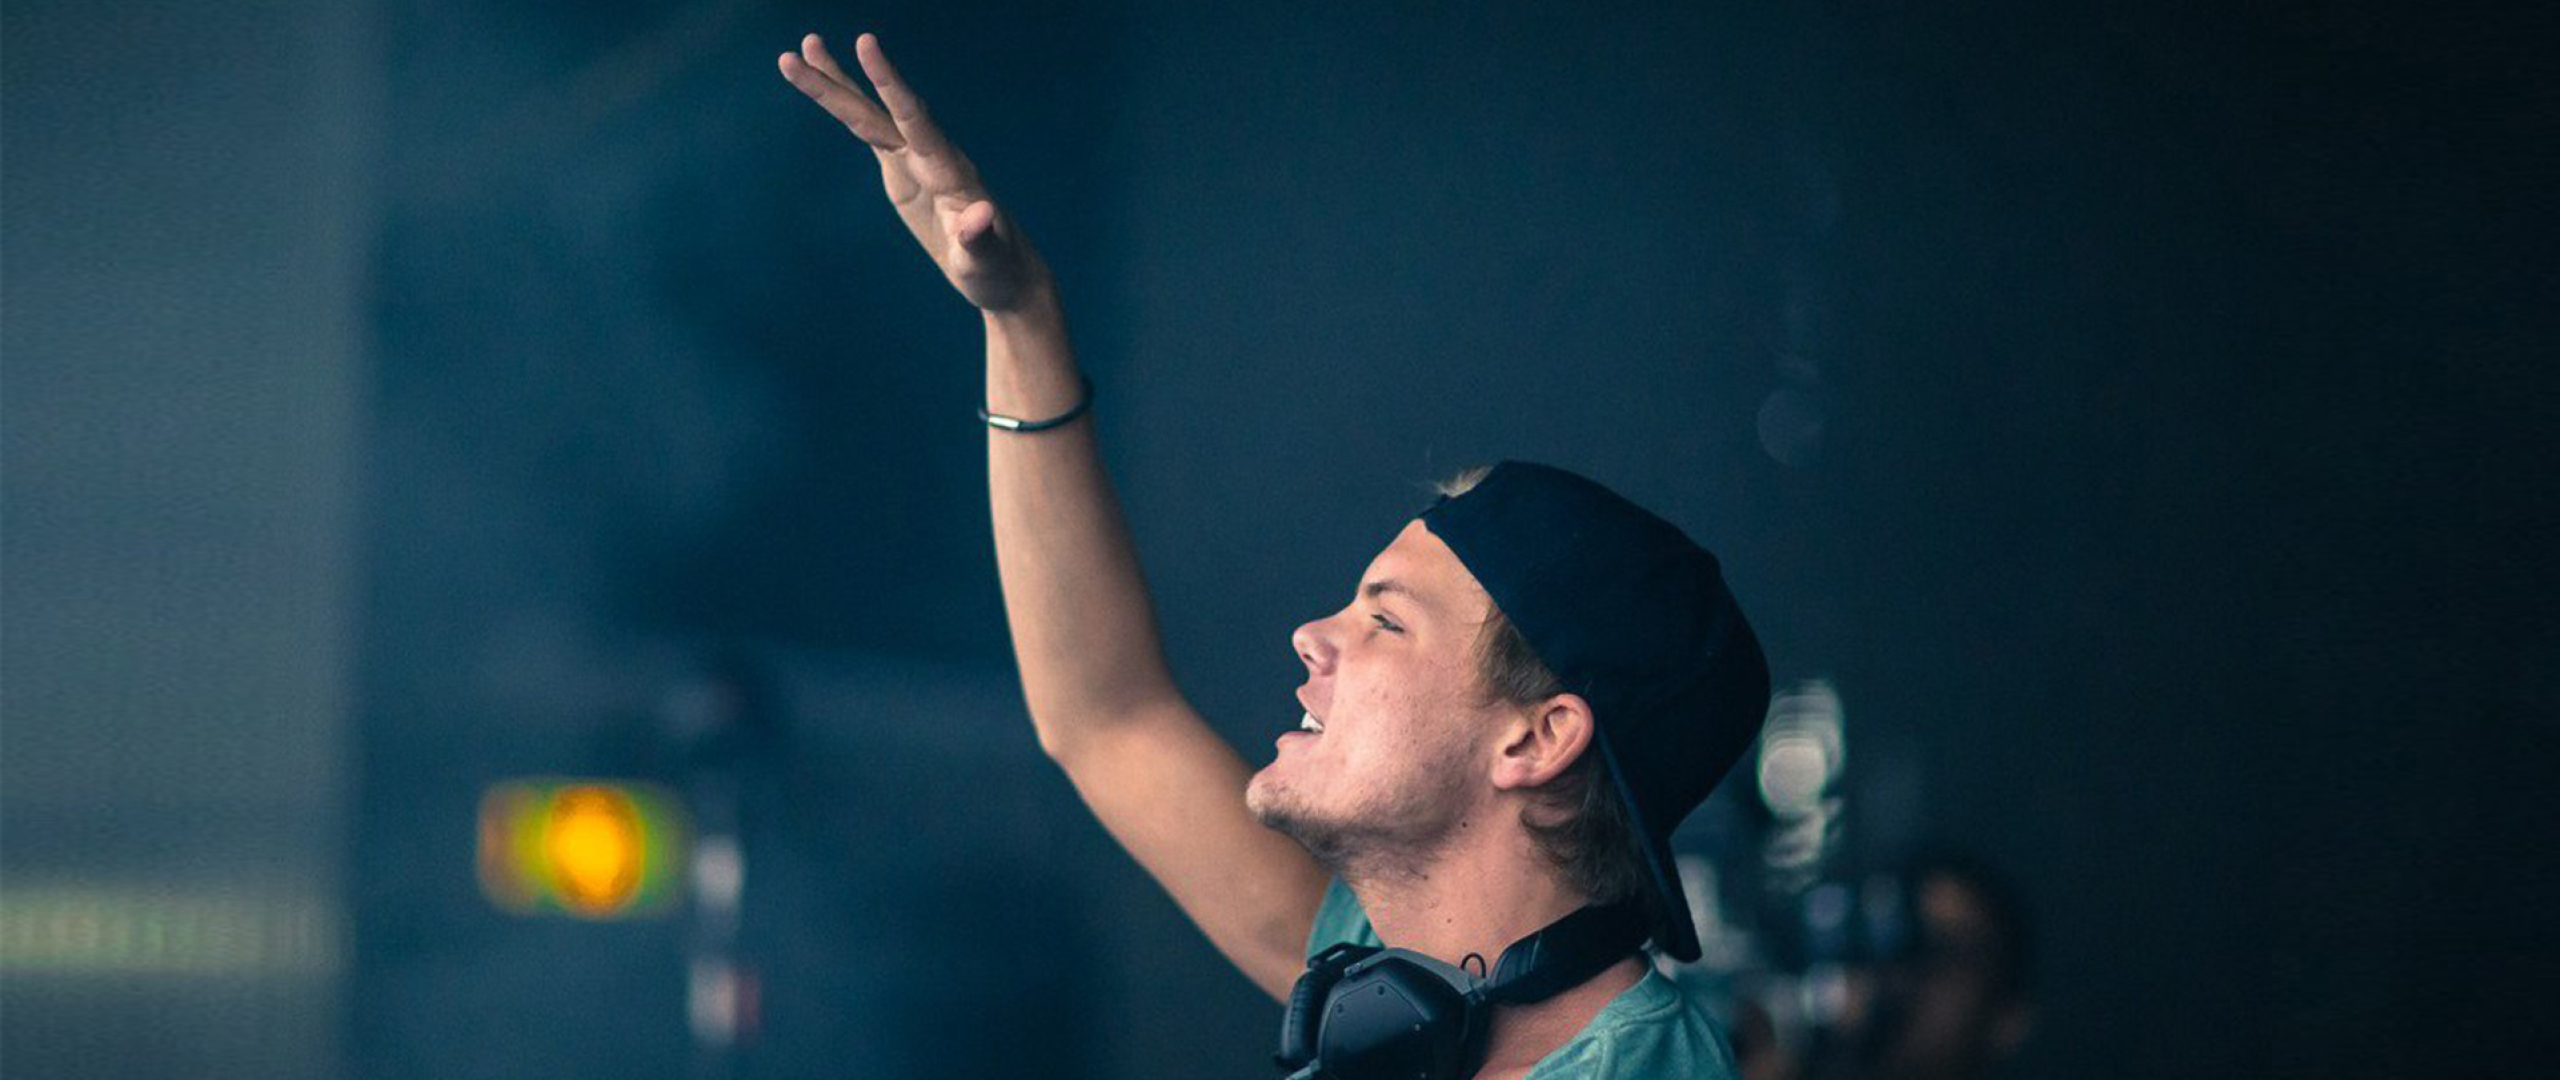 2560x1080 Avicii Tim Bergling Dj 2560x1080 Resolution Wallpaper Hd Music 4k Wallpapers Images Photos And Background Wallpapers Den